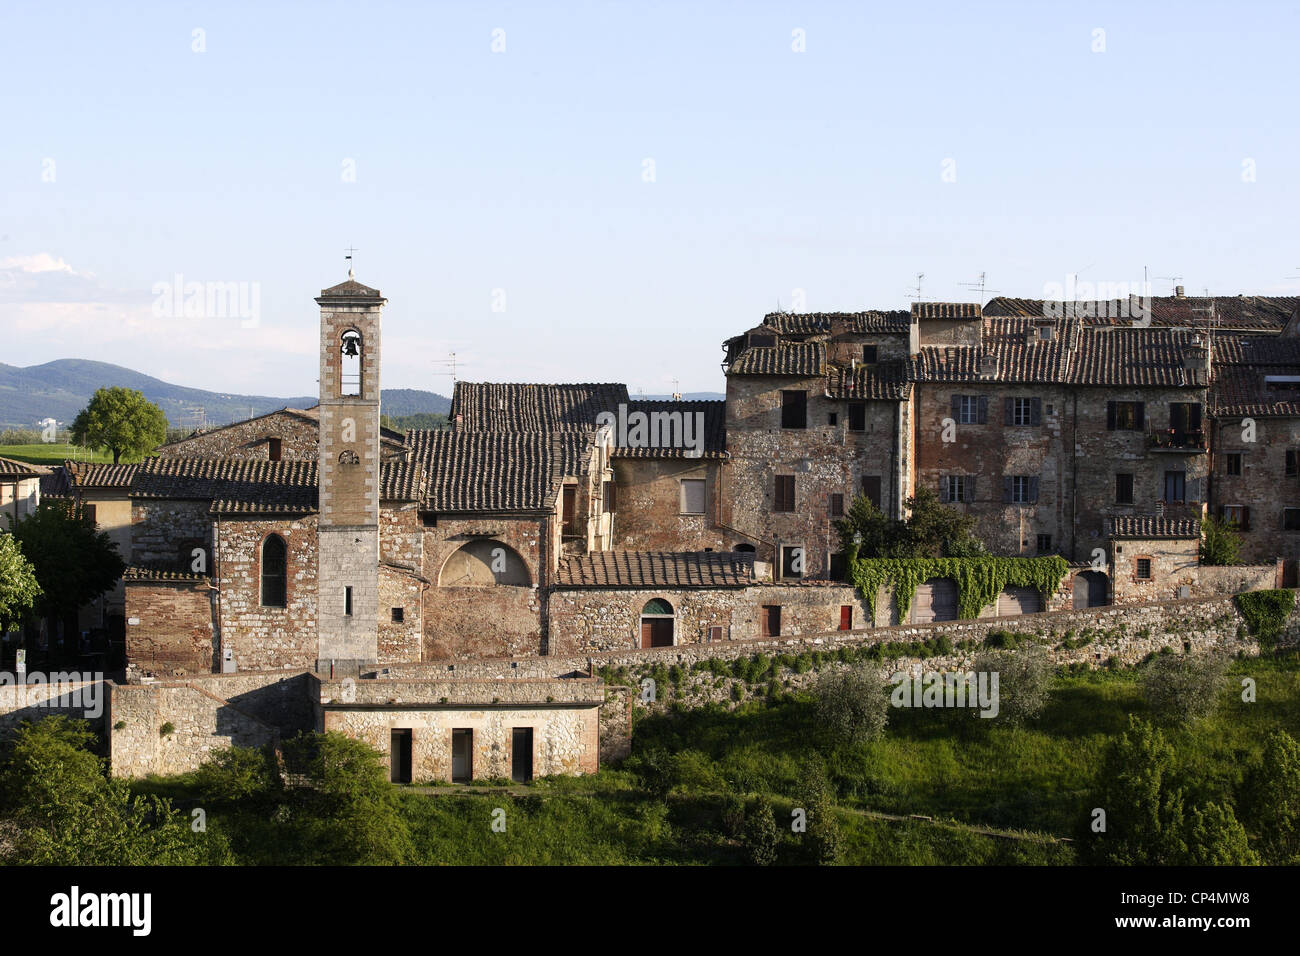 The suburb and the Church of Saint Catherine. Italy, Tuscany Region, Colle Val d'Elsa (Si). Stock Photo